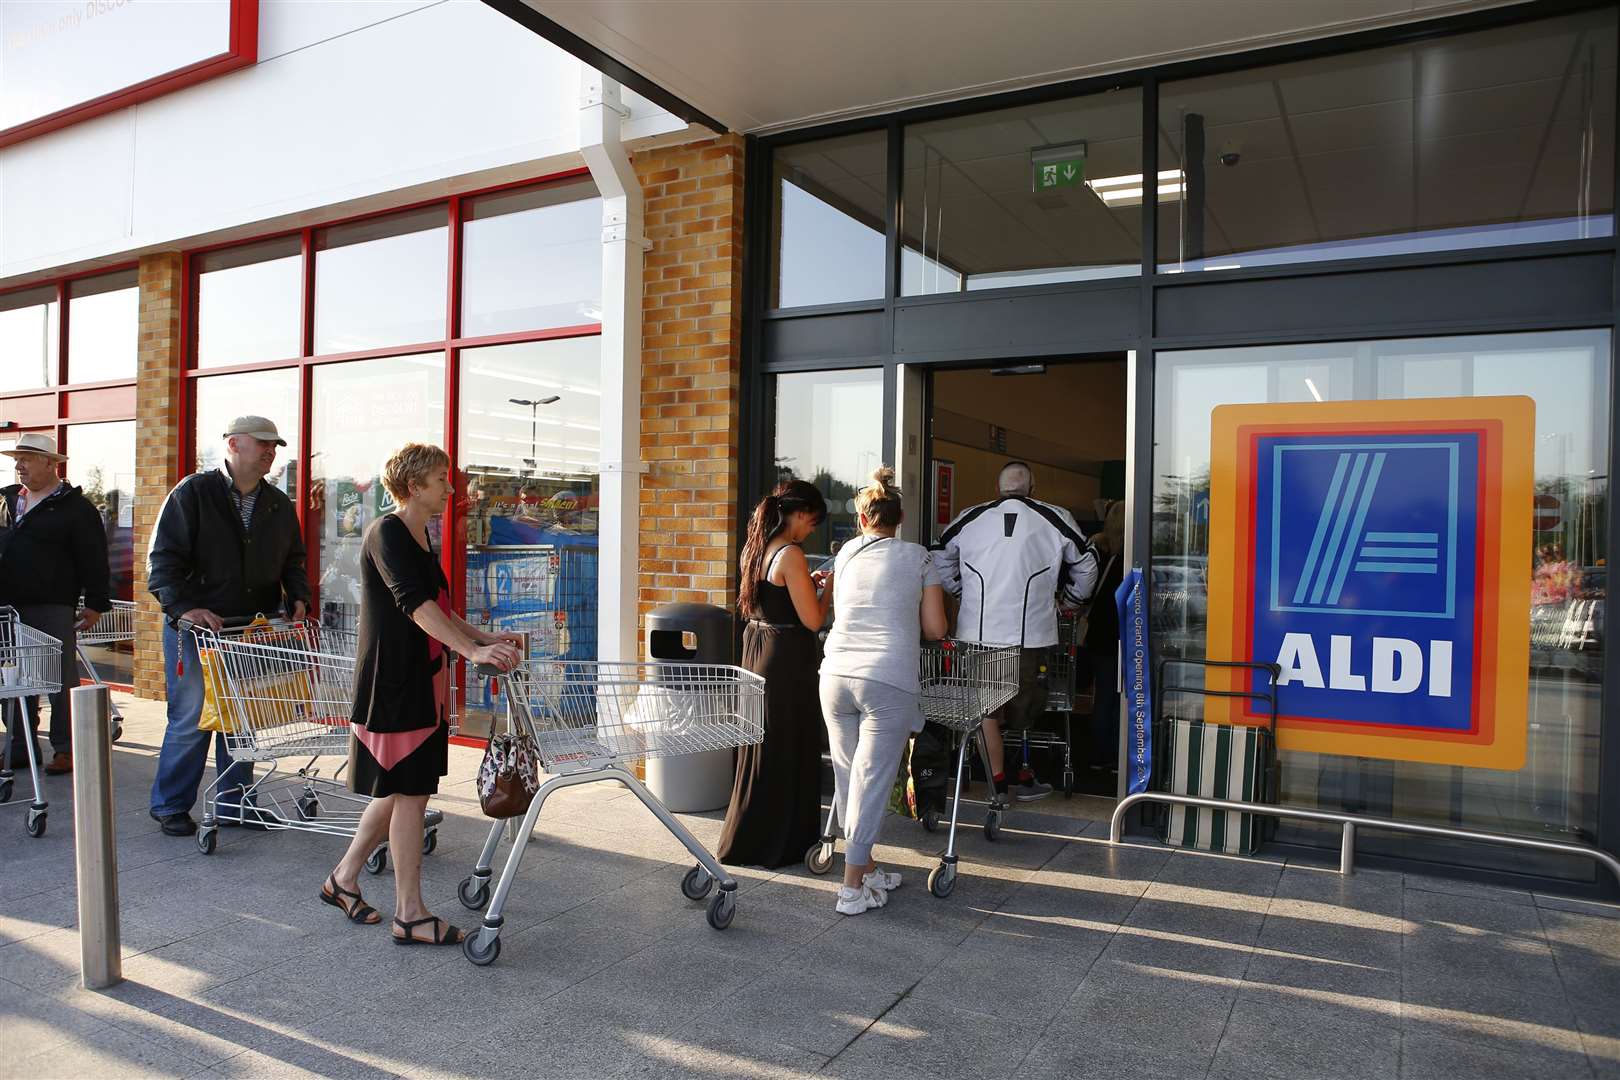 There's already an Aldi in Hermitage Lane, Aylesford